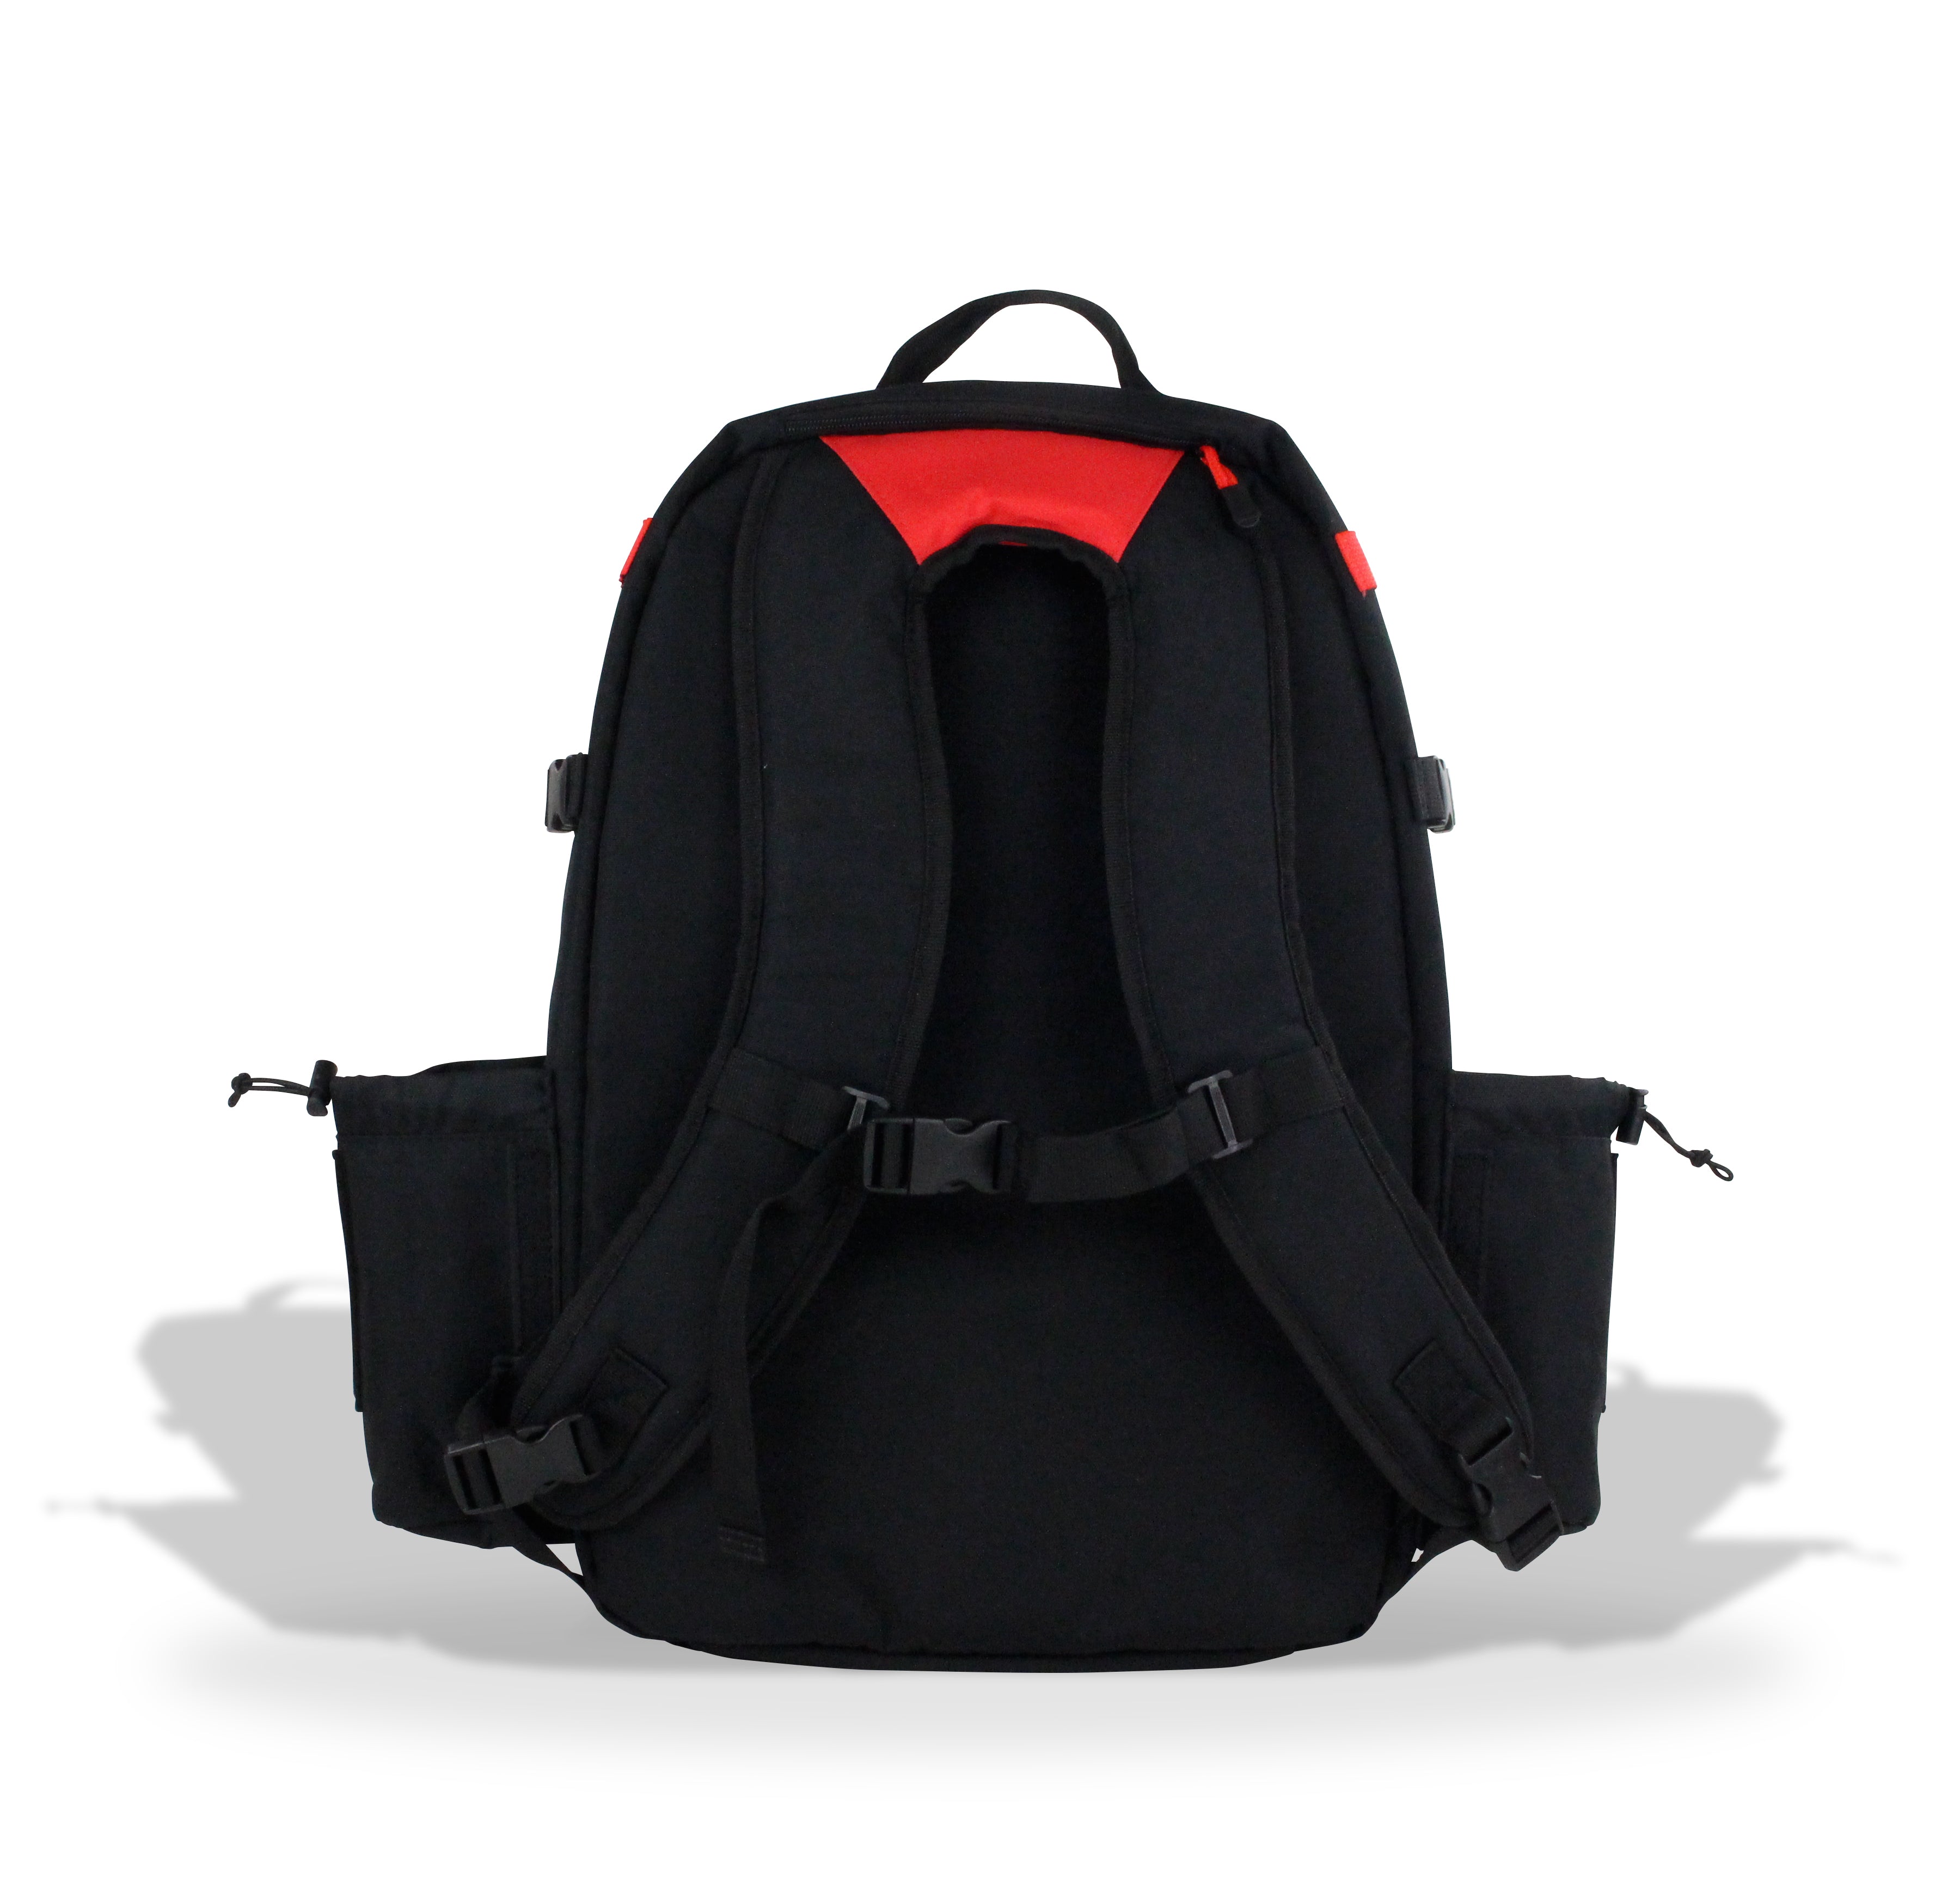 Backpack for Women, Nylon Travel Backpack Purse Black Small School Bag for  Girls, Green, One_Size : Amazon.in: Fashion